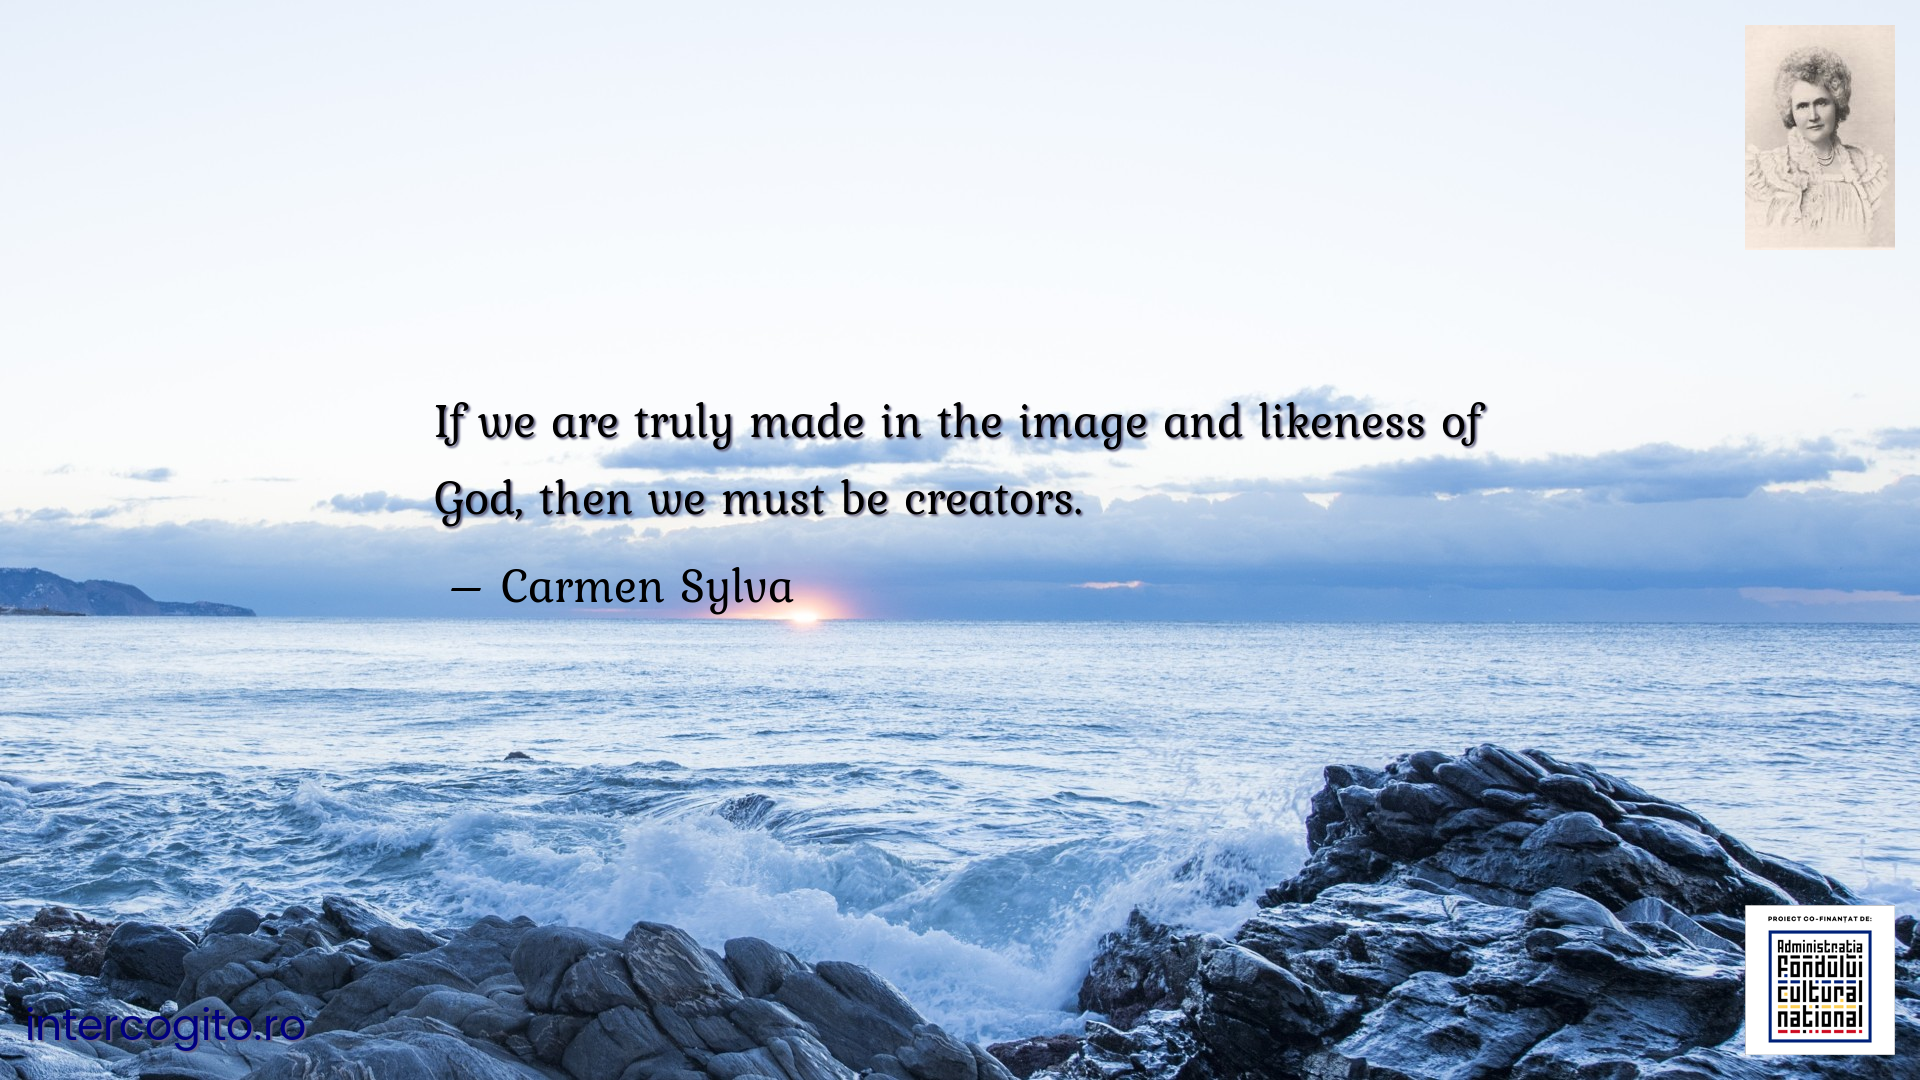 If we are truly made in the image and likeness of God, then we must be creators.